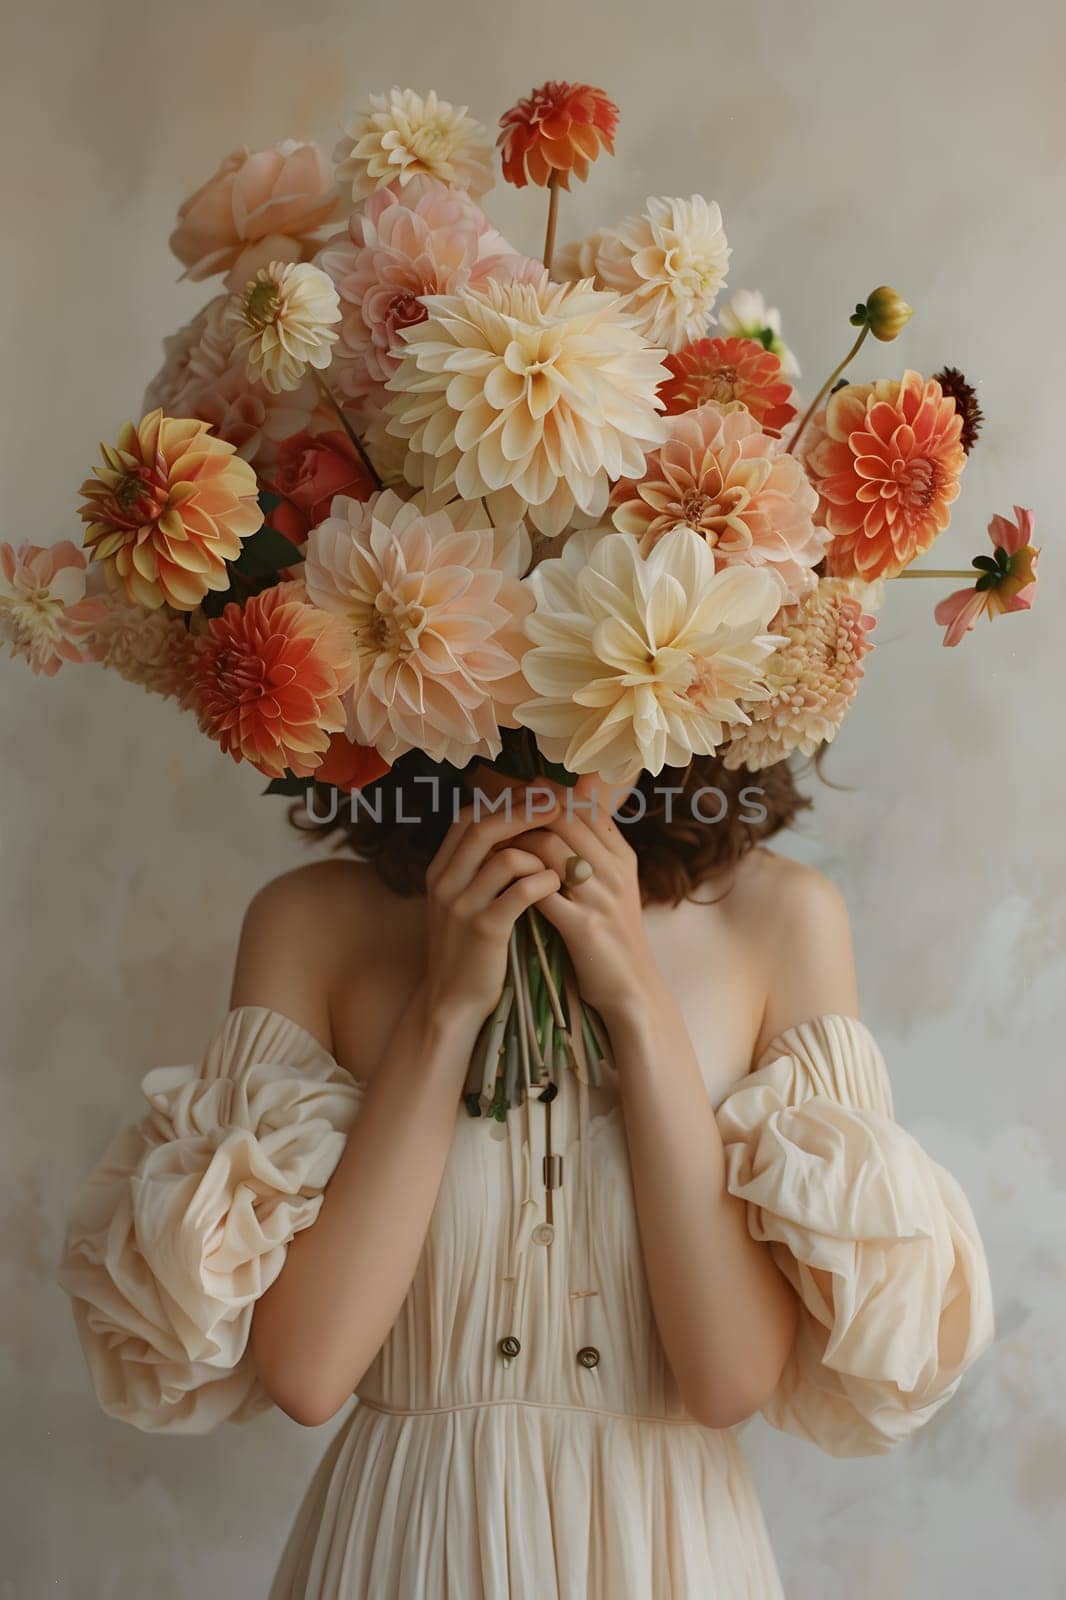 A woman in a white dress holds a bouquet of flowers in front of her face by Nadtochiy